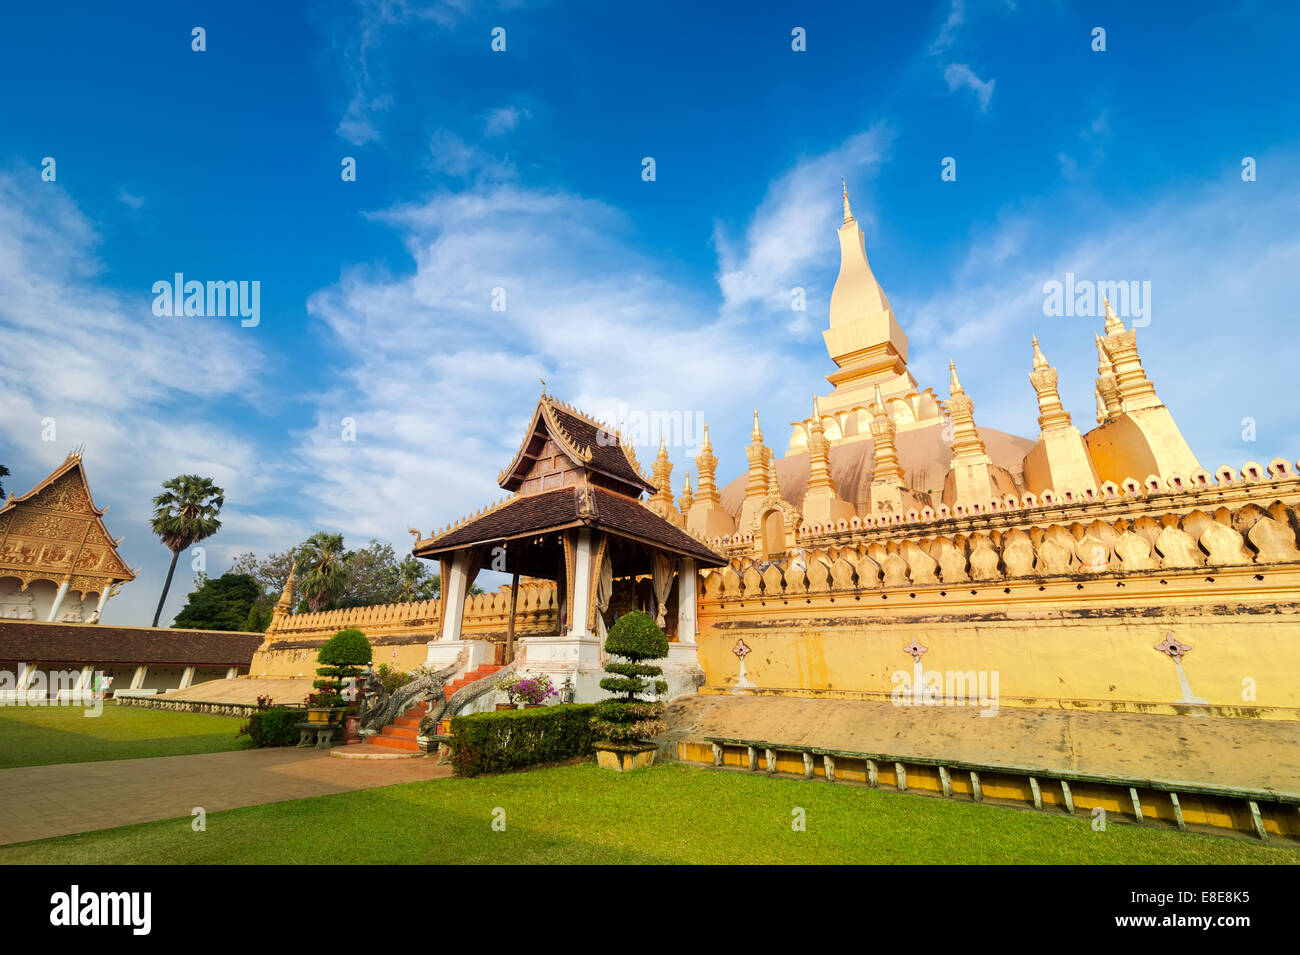 Religious architecture and landmarks. Golden buddhist pagoda of Phra That Luang Temple under blue sky. Vientiane, Laos travel la Stock Photo